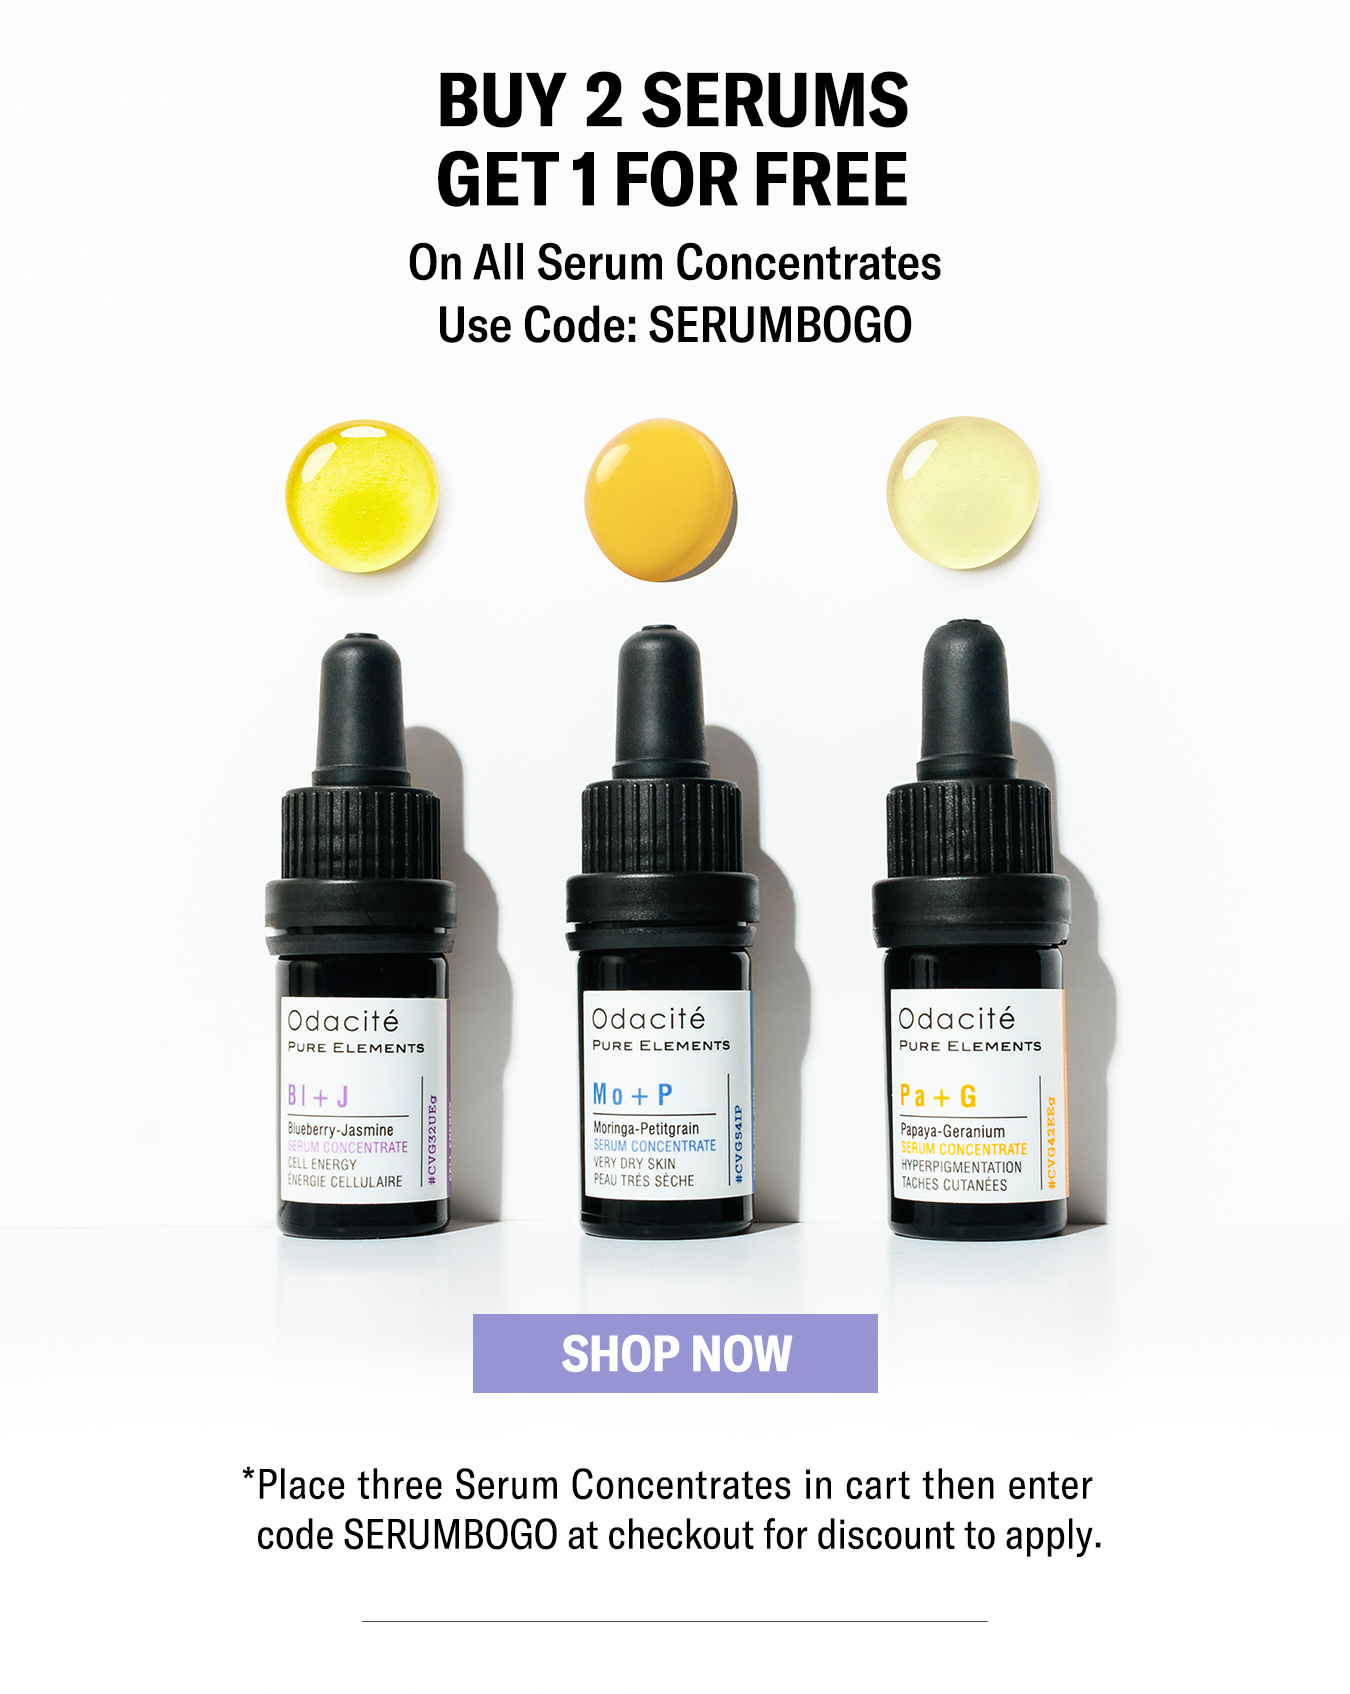 Buy 2 Serums, Get 1 For Free On All Serum Concentrates. Use Code: SERUMBOGO